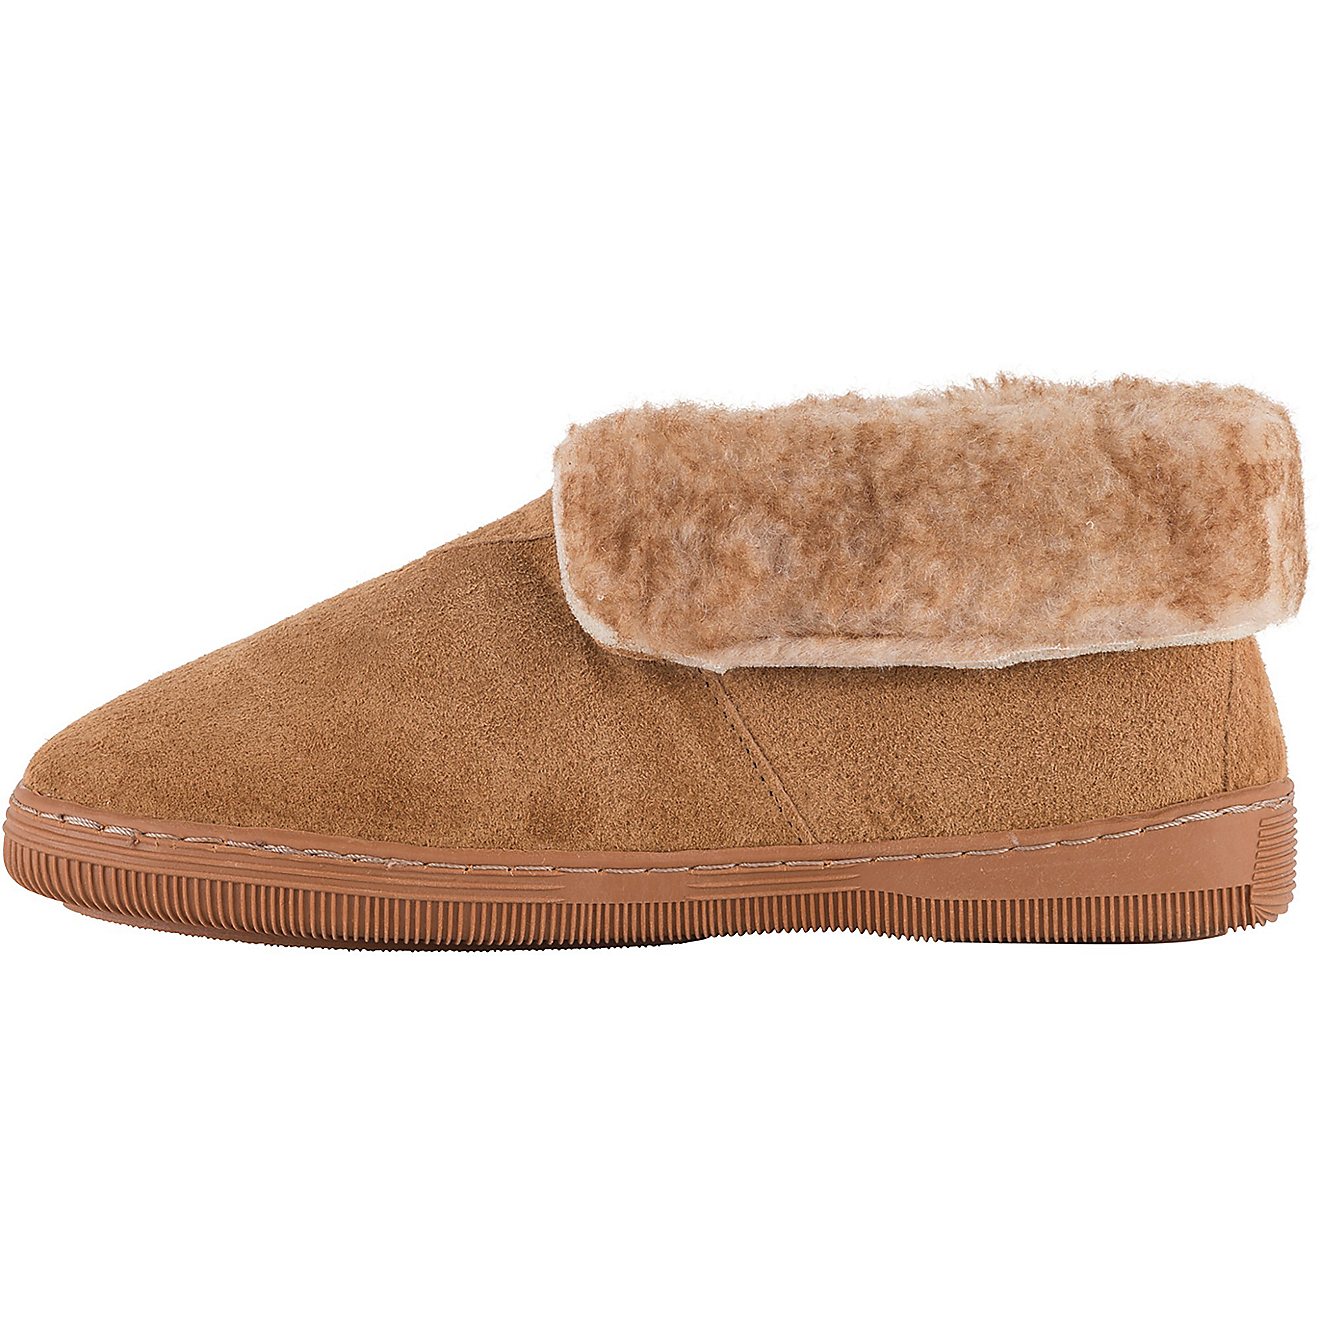 Lamo Men's Bootie Slippers | Free Shipping at Academy